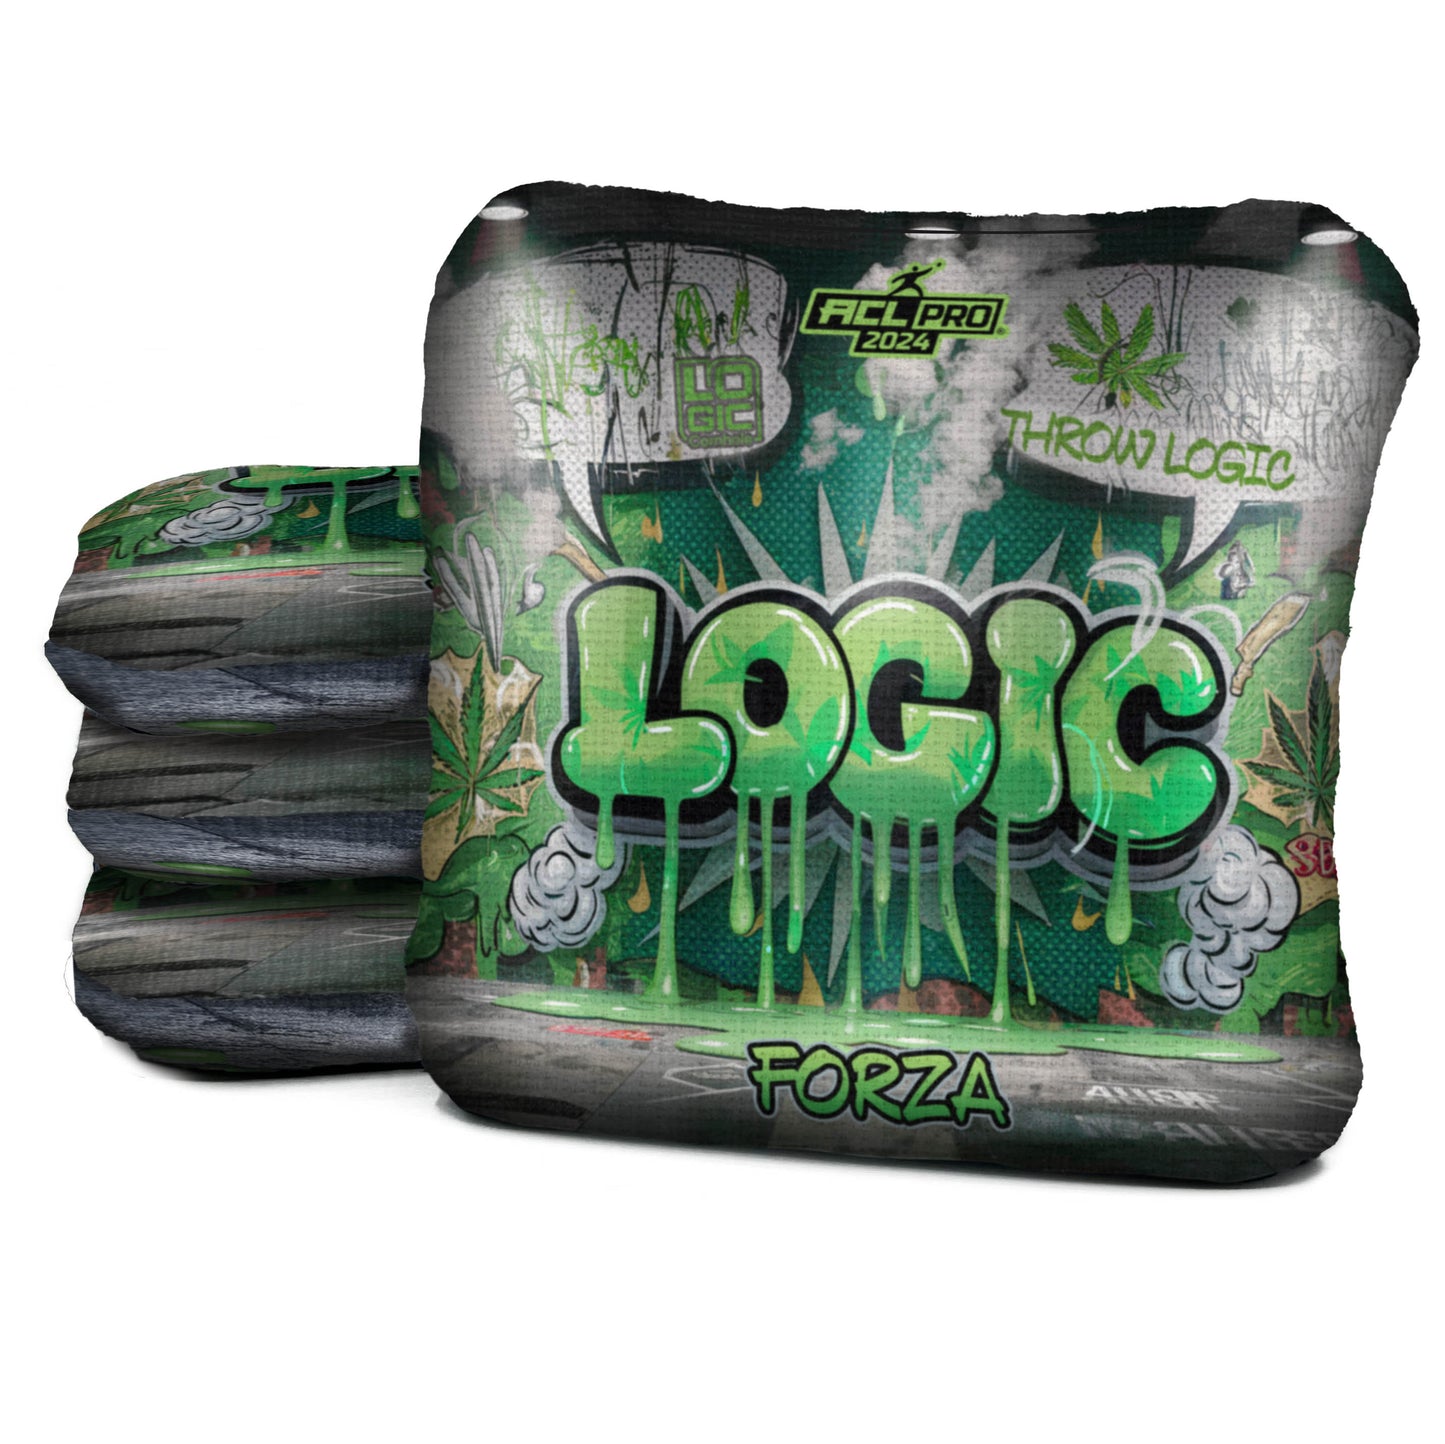 (RETIRED) 420 Graffiti - MULTIPLE BAG SERIES AVAILABLE - ACL APPROVED BAGS - Set of 4 bags